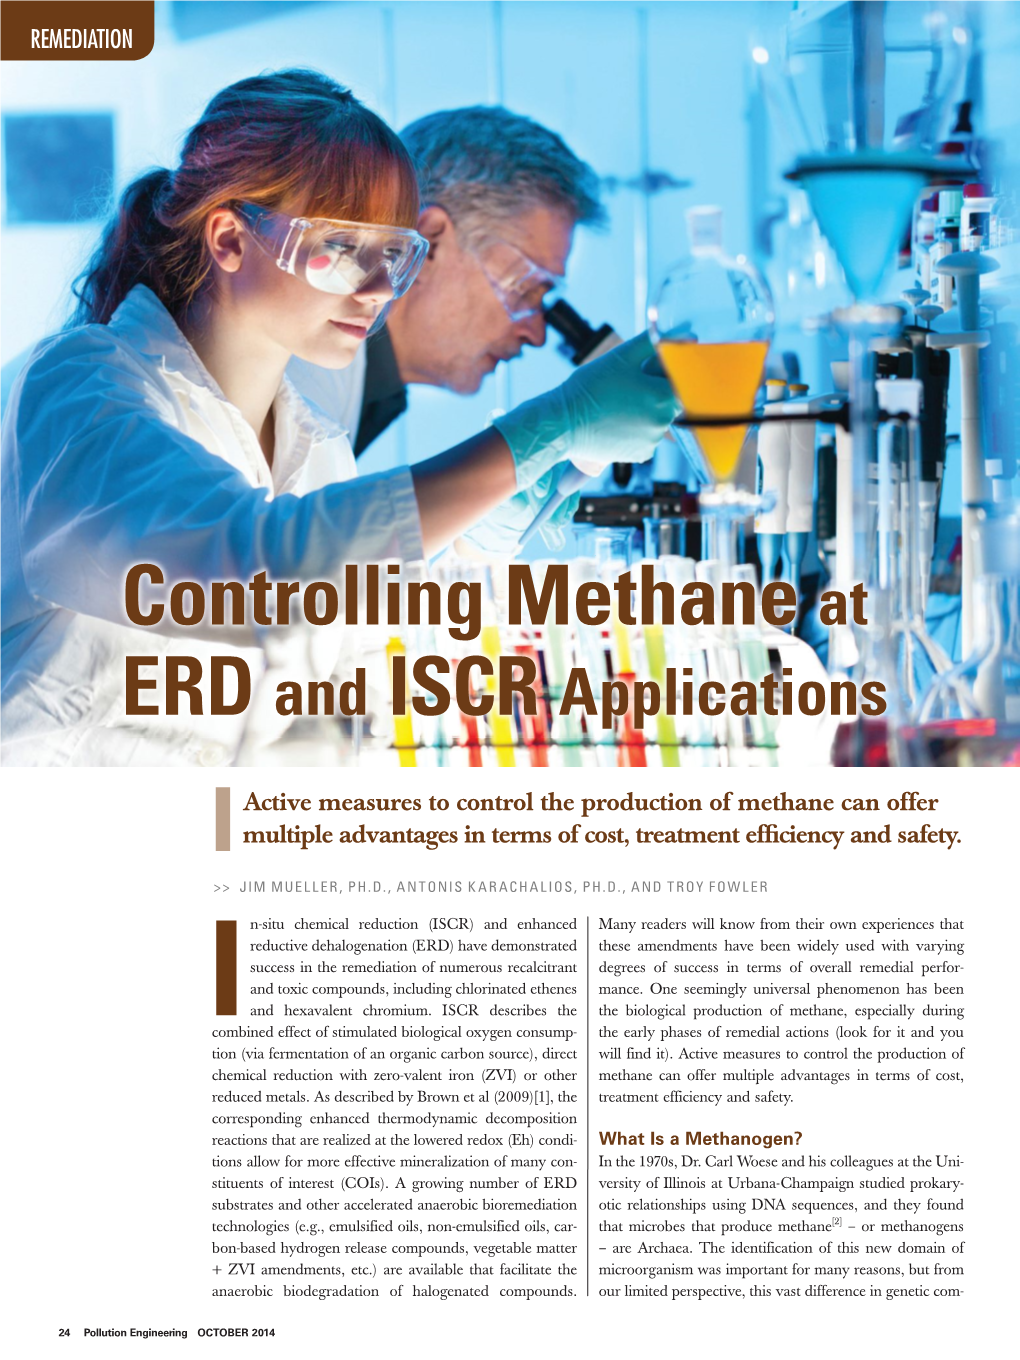 Controlling Methane at ERD and ISCR Applications